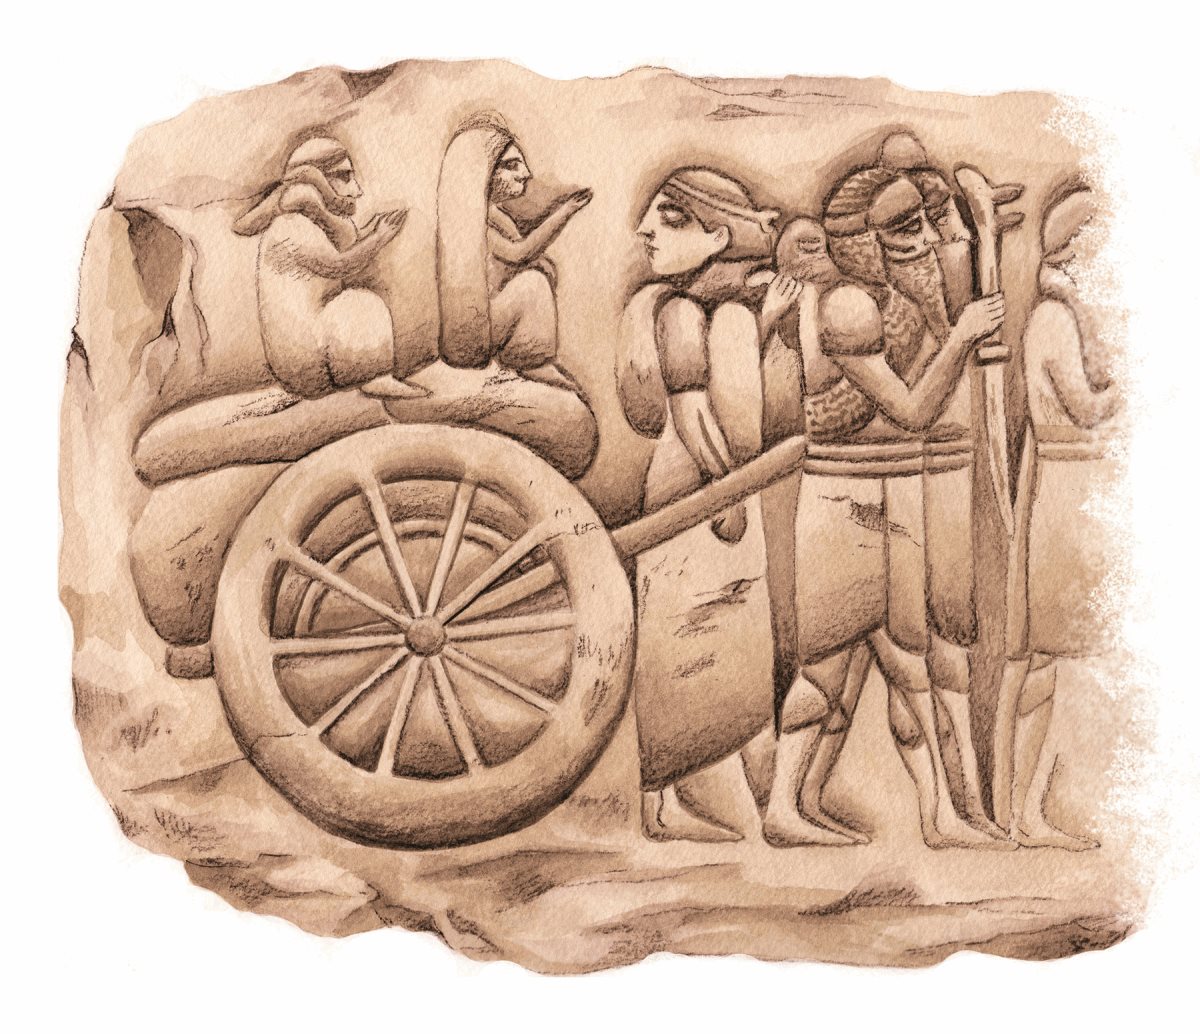 By about 3000 BCE, Sumerians in Mesopotamia (now Iraq) were making use of the wheel, and it was firmly established by the time this Assyrian relief showing a wagon carrying prisoners of war was carved at Nineveh, in northern Iraq, about 700 BCE.